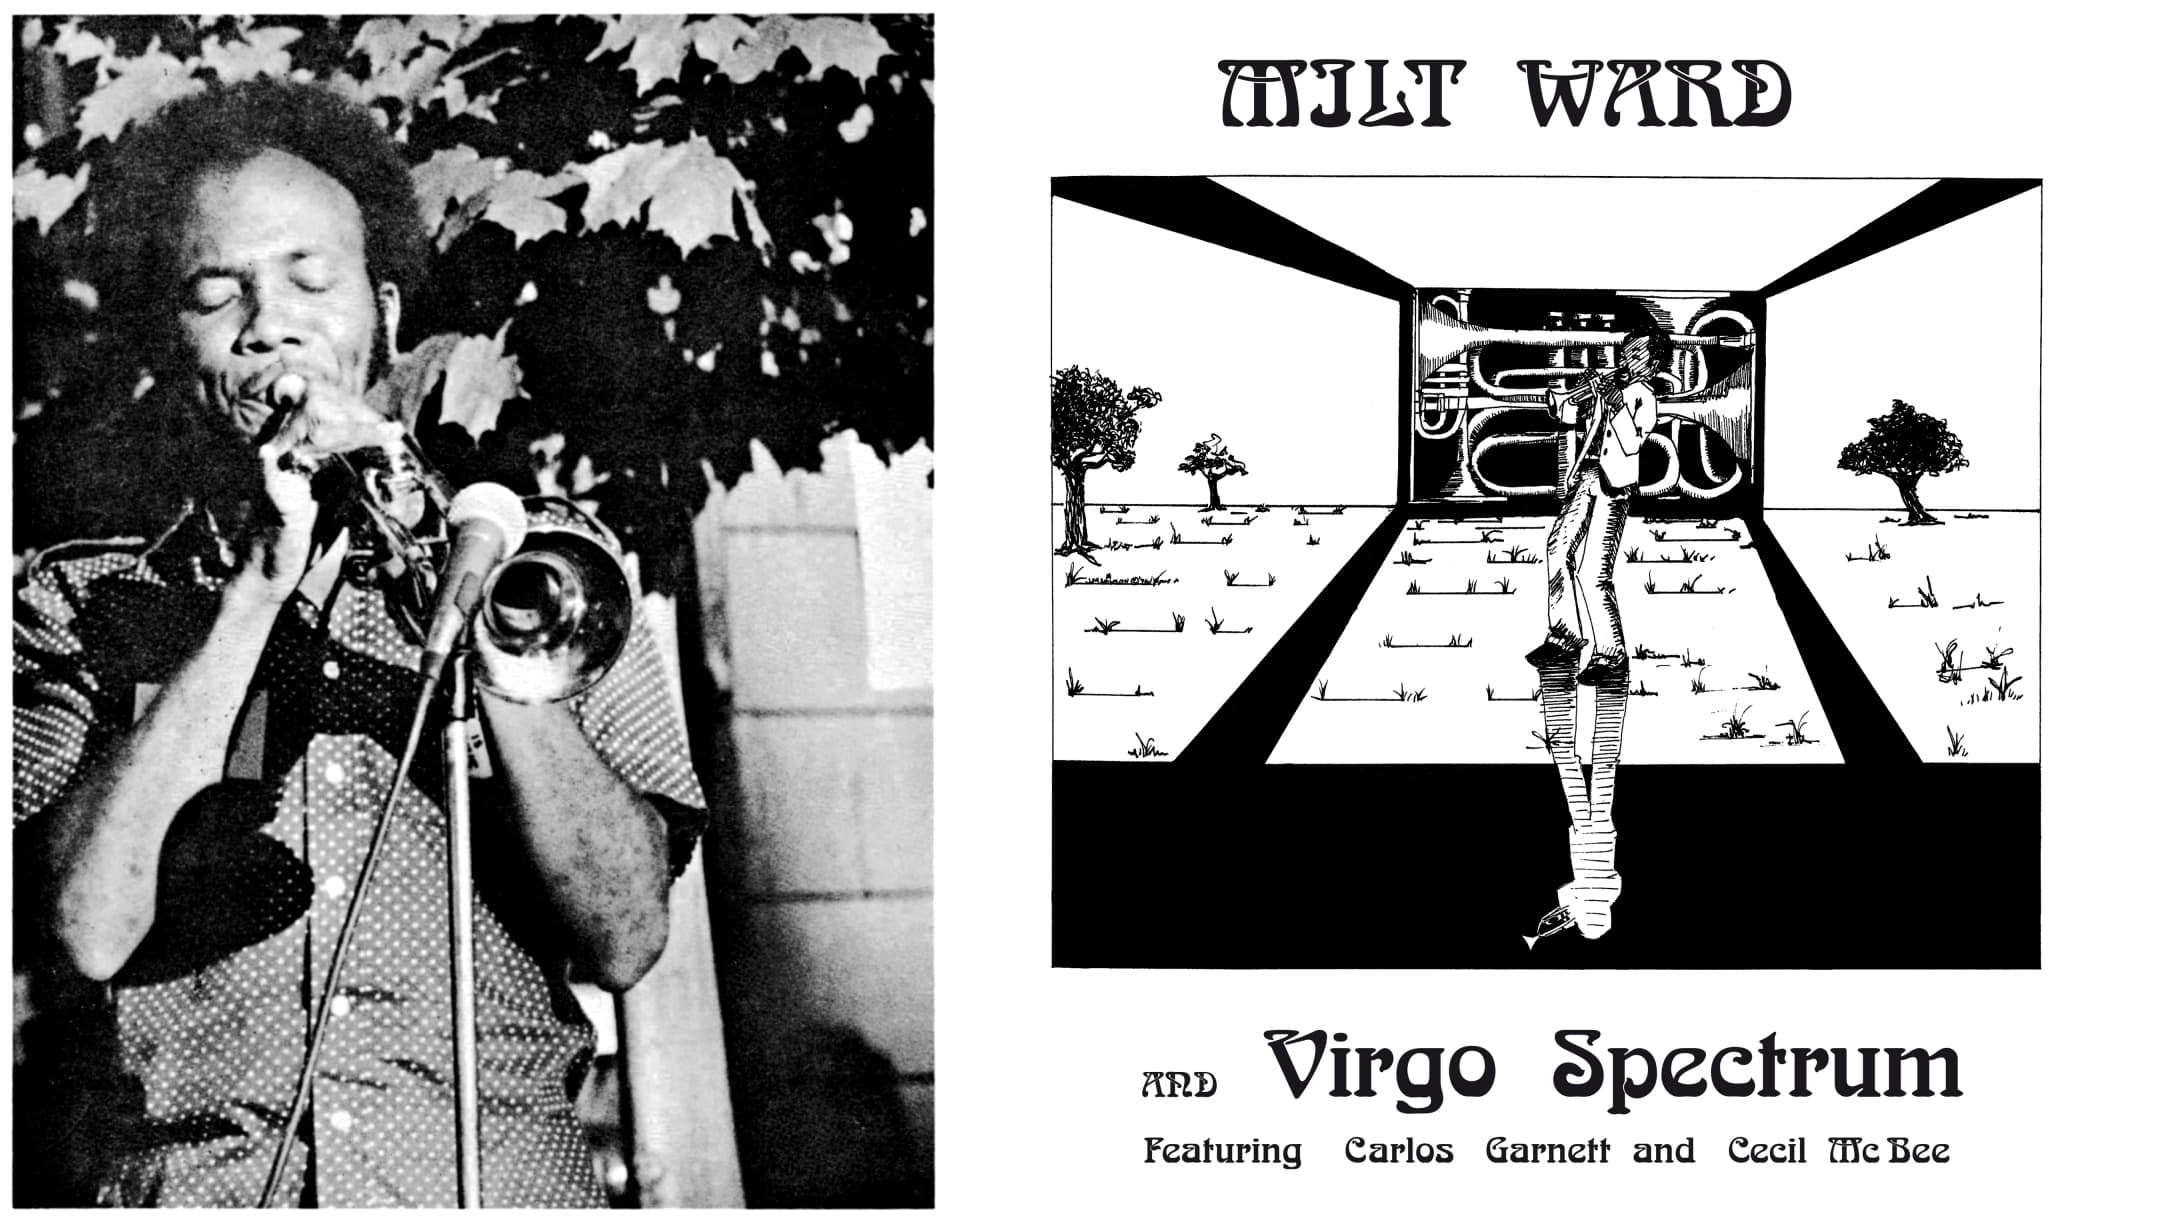 Trumpeter Milt Ward's 1970s jazz album, &quot;Milt Ward and Virgo Spectrum,&quot; is getting a proper reissue from Frederiksberg Records. (Courtesy Frederiksberg Records)